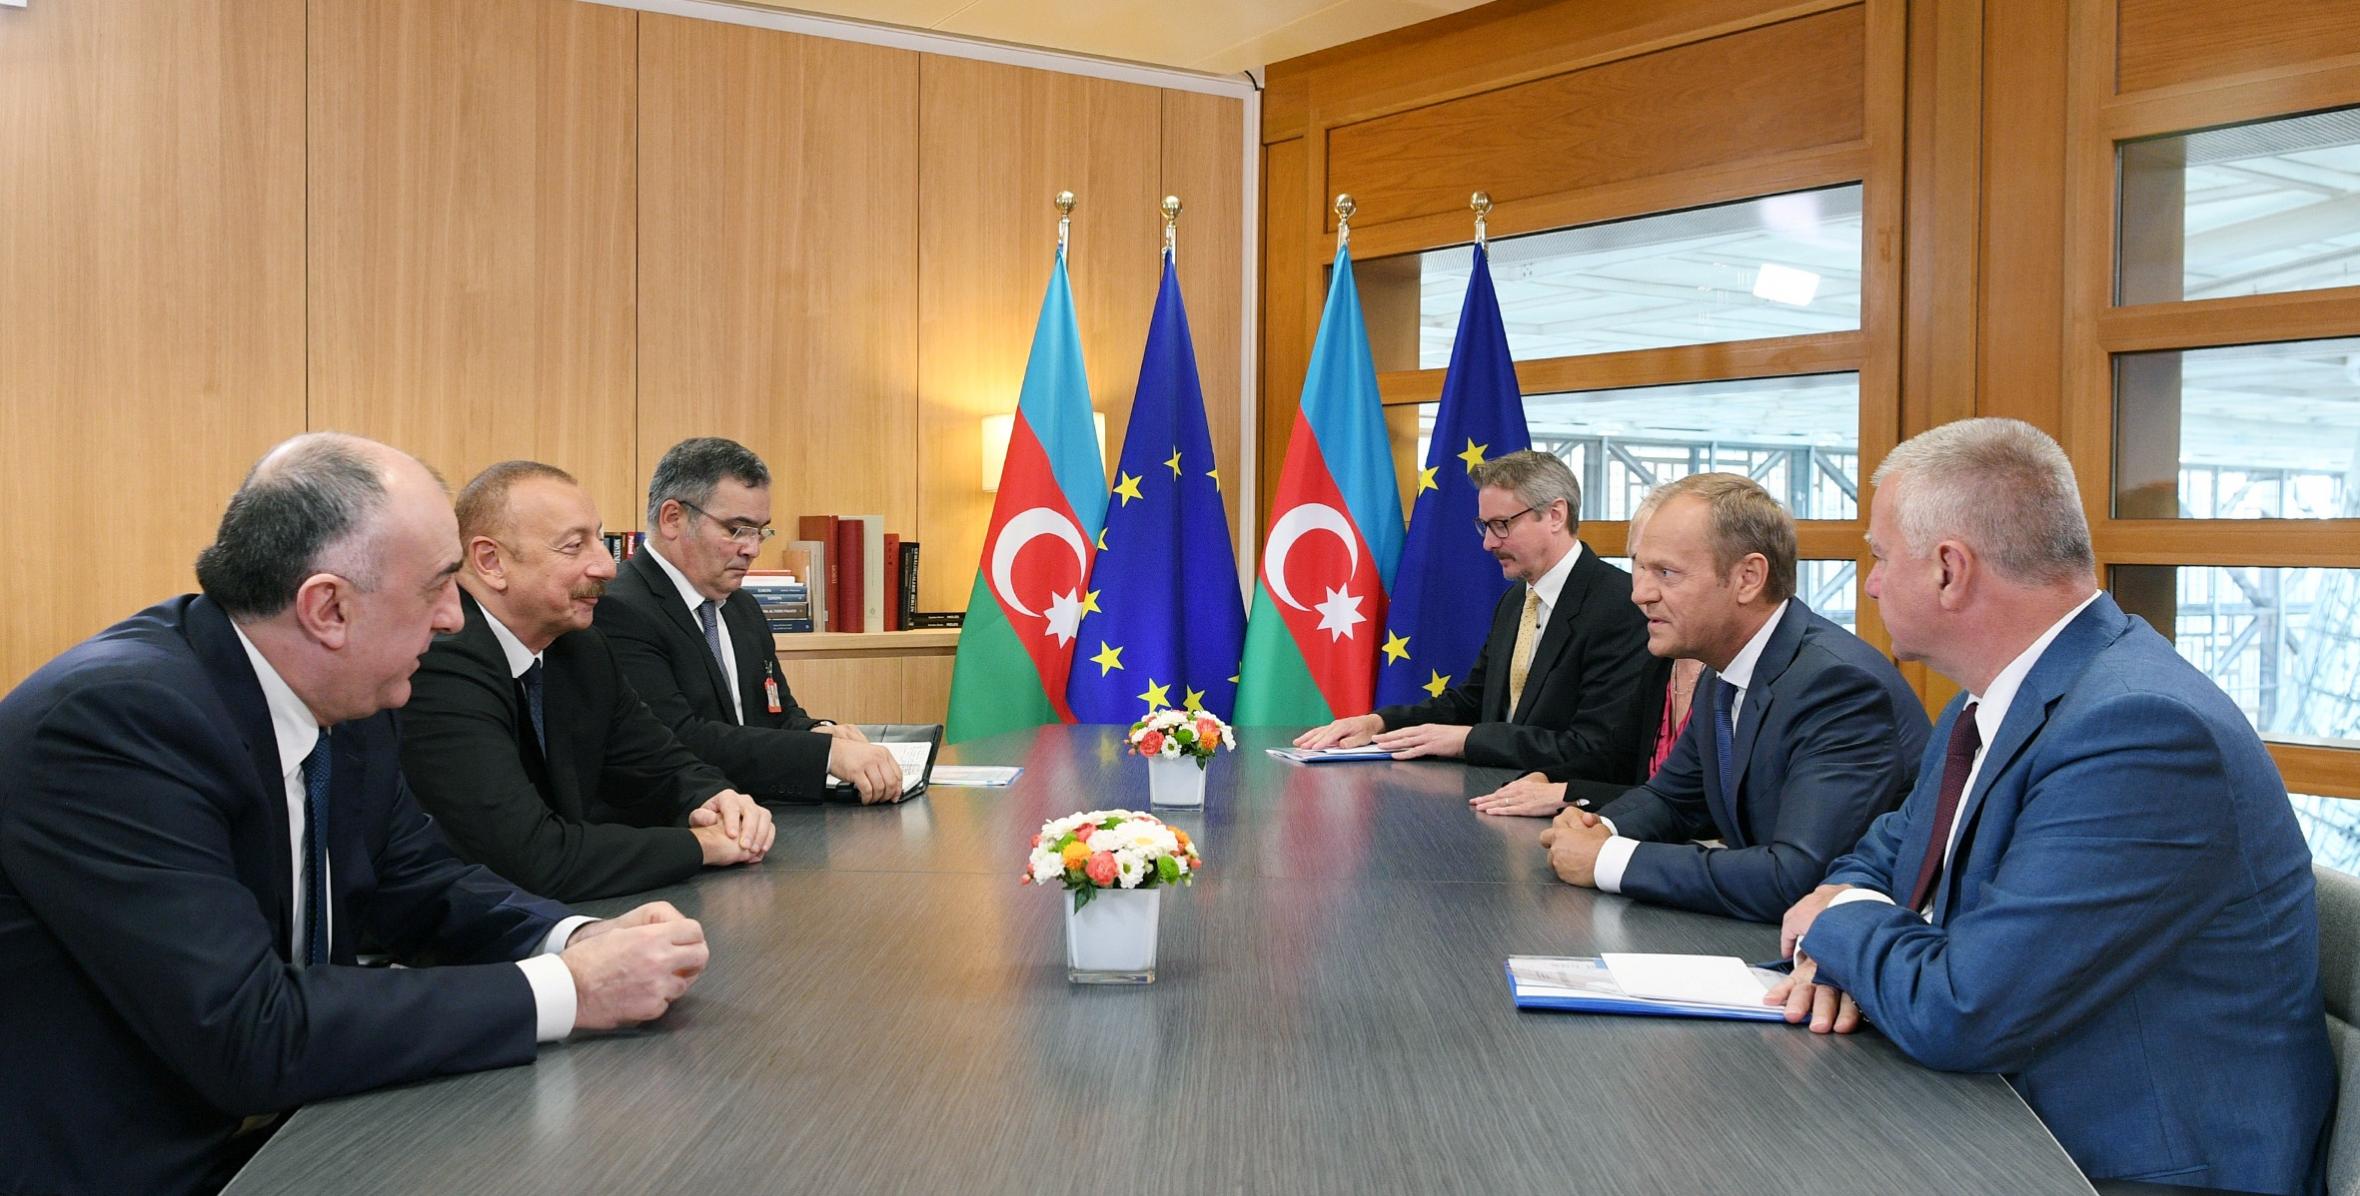 Ilham Aliyev met with President of European Council in Brussels